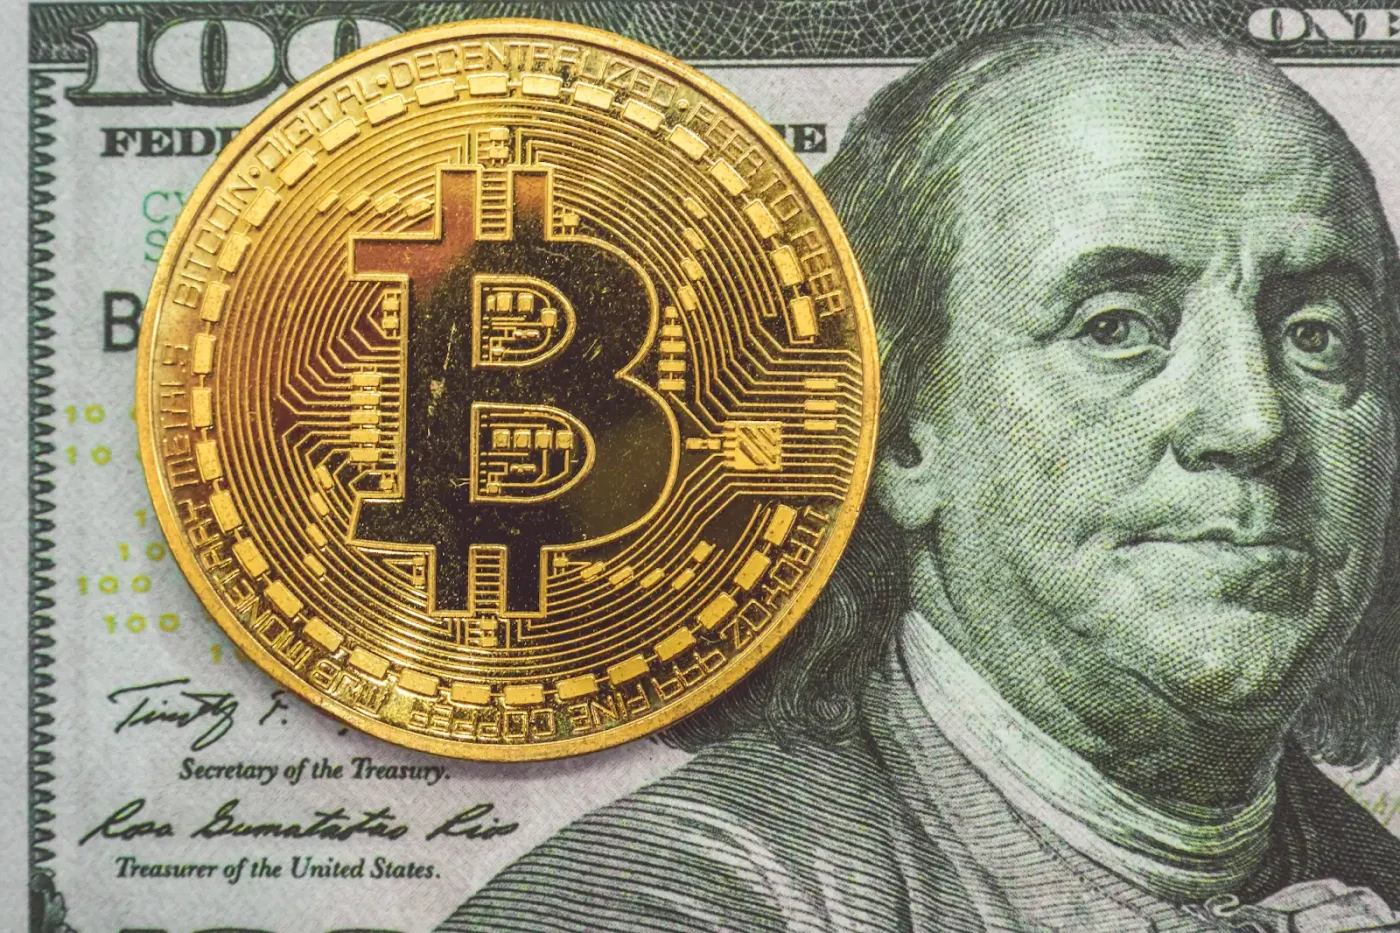 Image of a Bitcoin's symbol on a gold coin placed on top of a US $100 bill